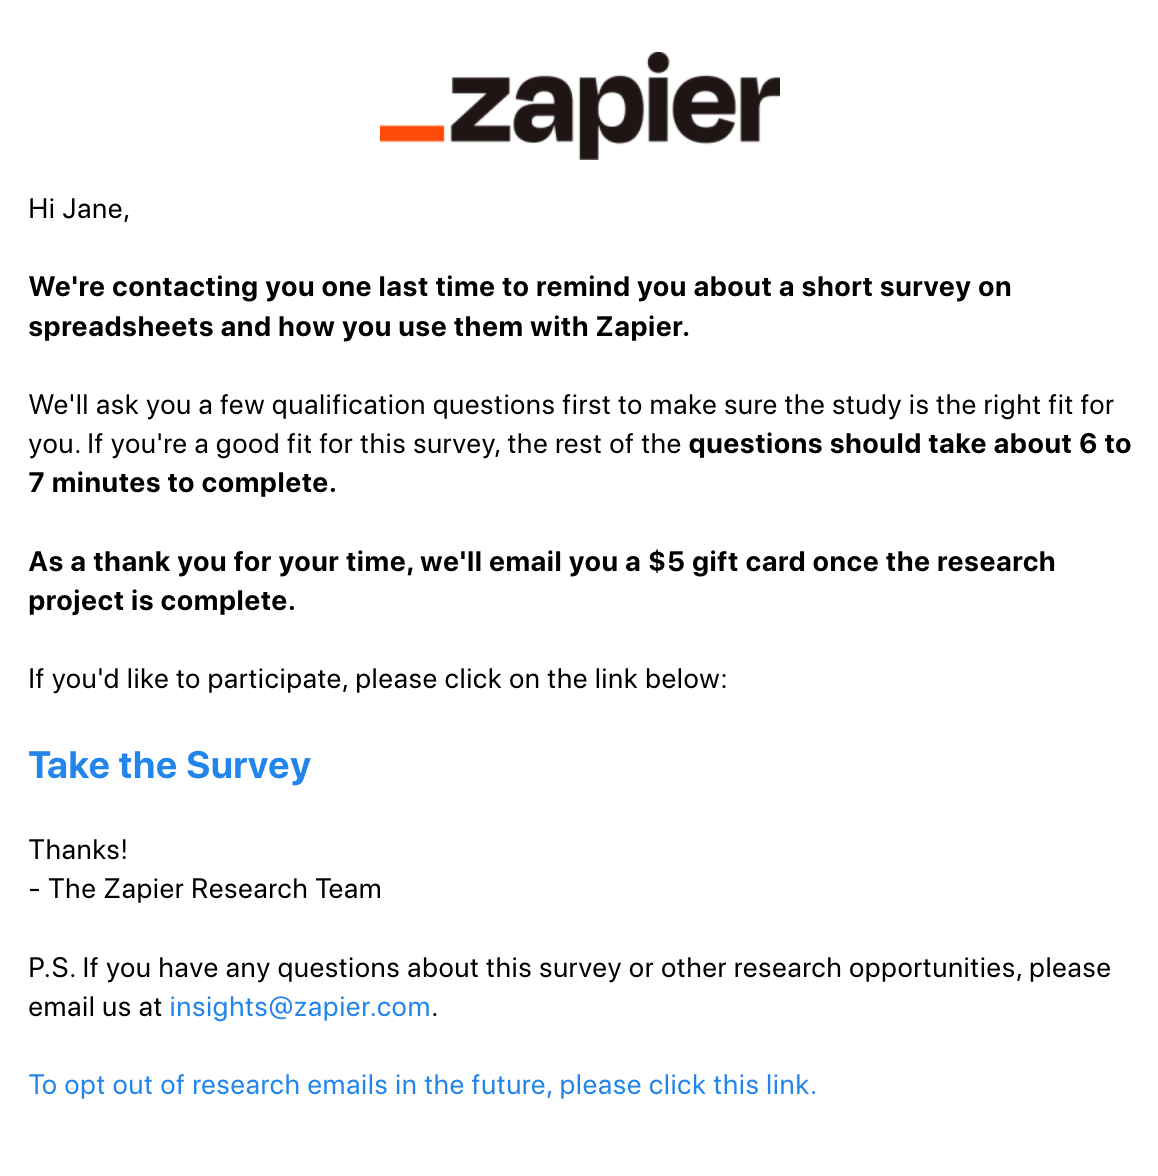 Survey Email Examples: Screenshot of Zapier's survey email